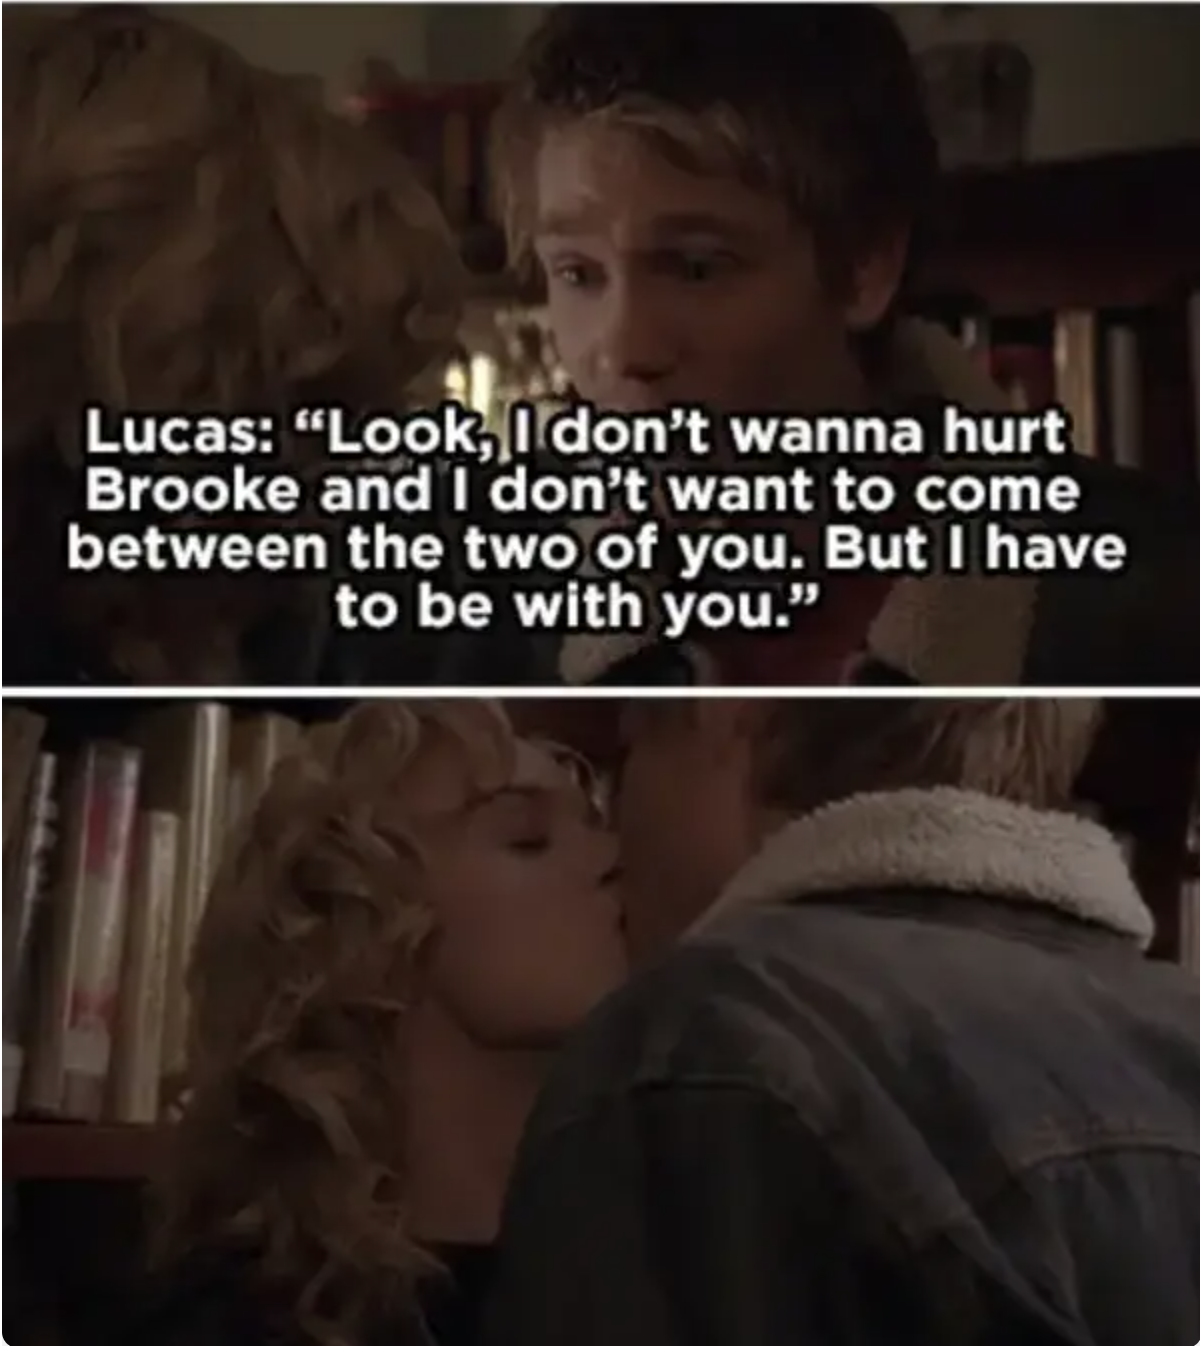 Lucas says he doesn&#x27;t want to hurt Brooke or come between her and Peyton but he &quot;has&quot; to be with Peyton, they kiss